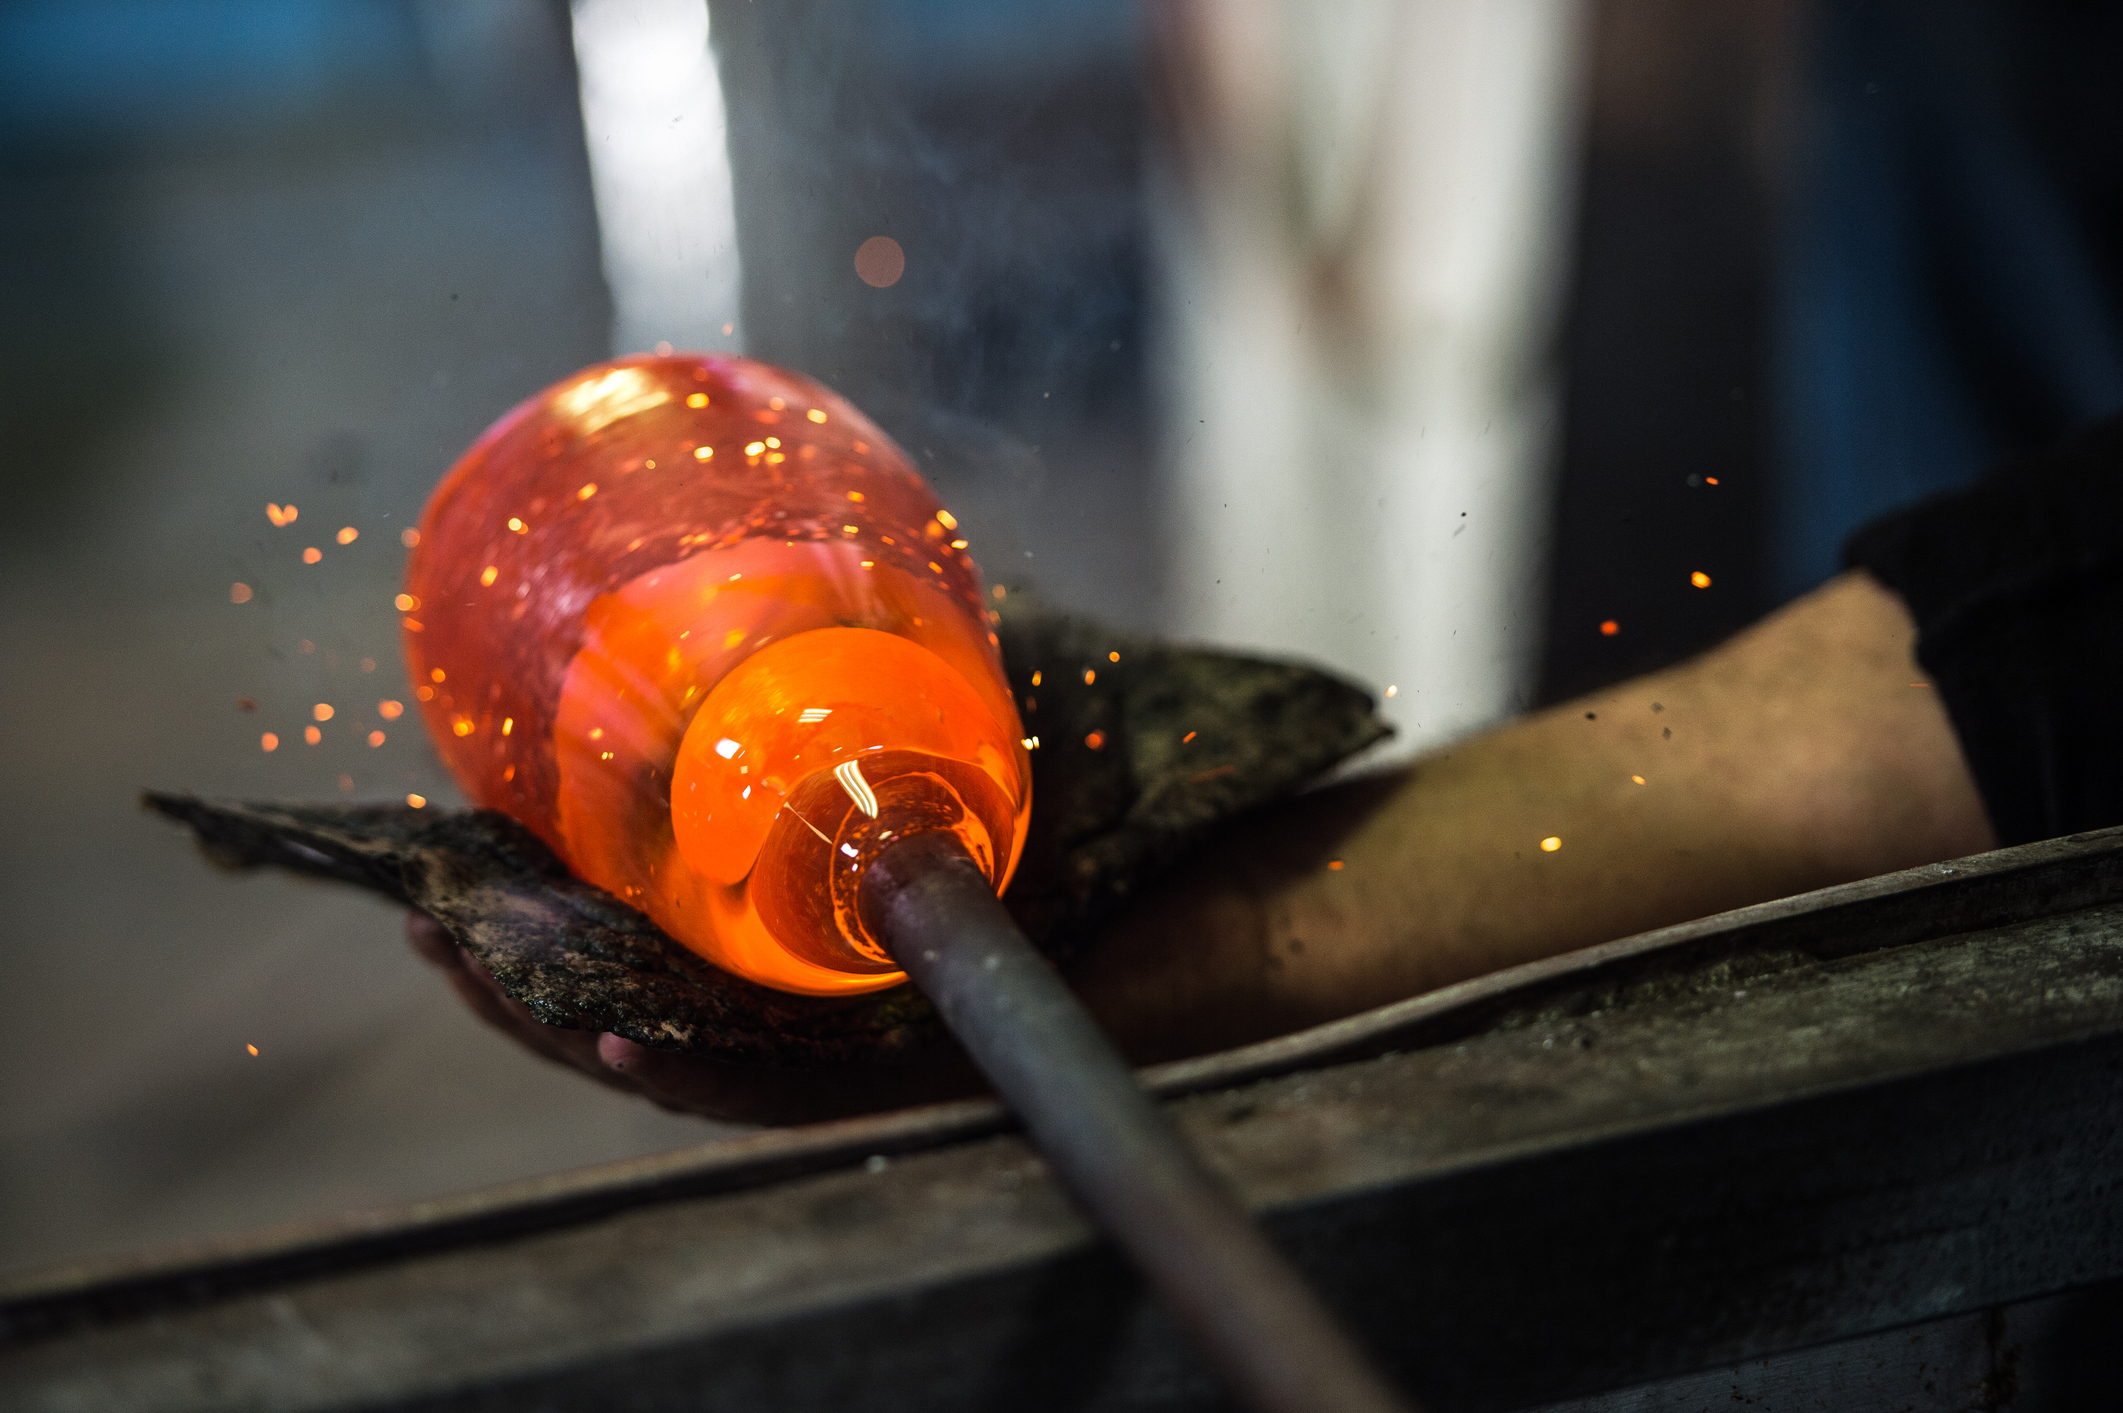 Learn About Glass Art at Glassblowing Houston